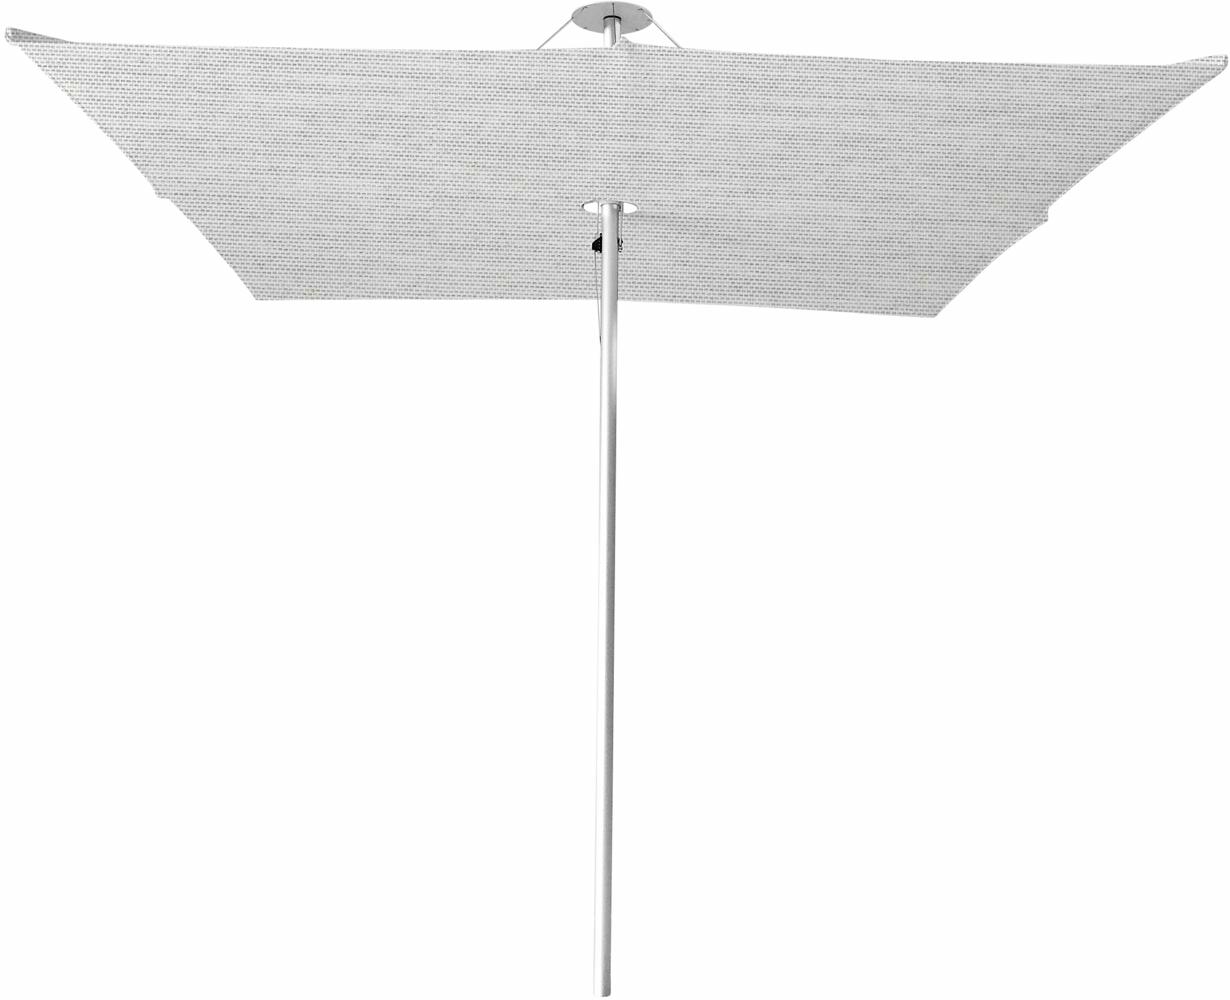 Infina center post umbrella, 2,5 m square, with frame in Aluminum and Solidum Marble canopy. 